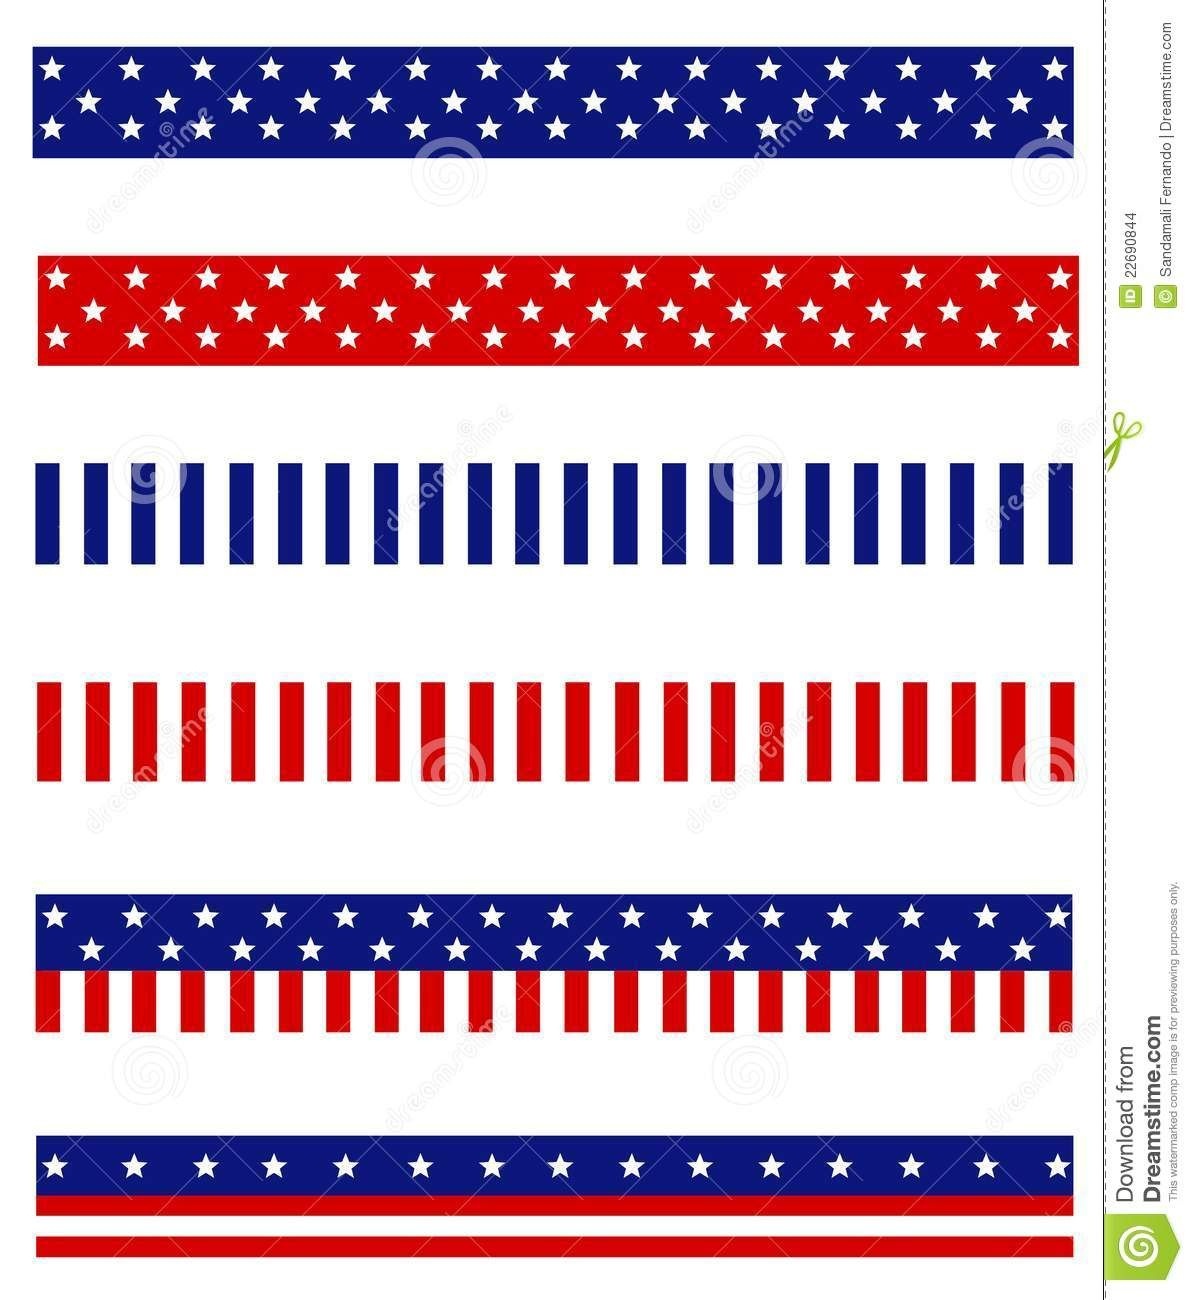 Image Result For Patriotic Borders Free Printable | Patriotic - Free Printable Christmas Bulletin Board Borders